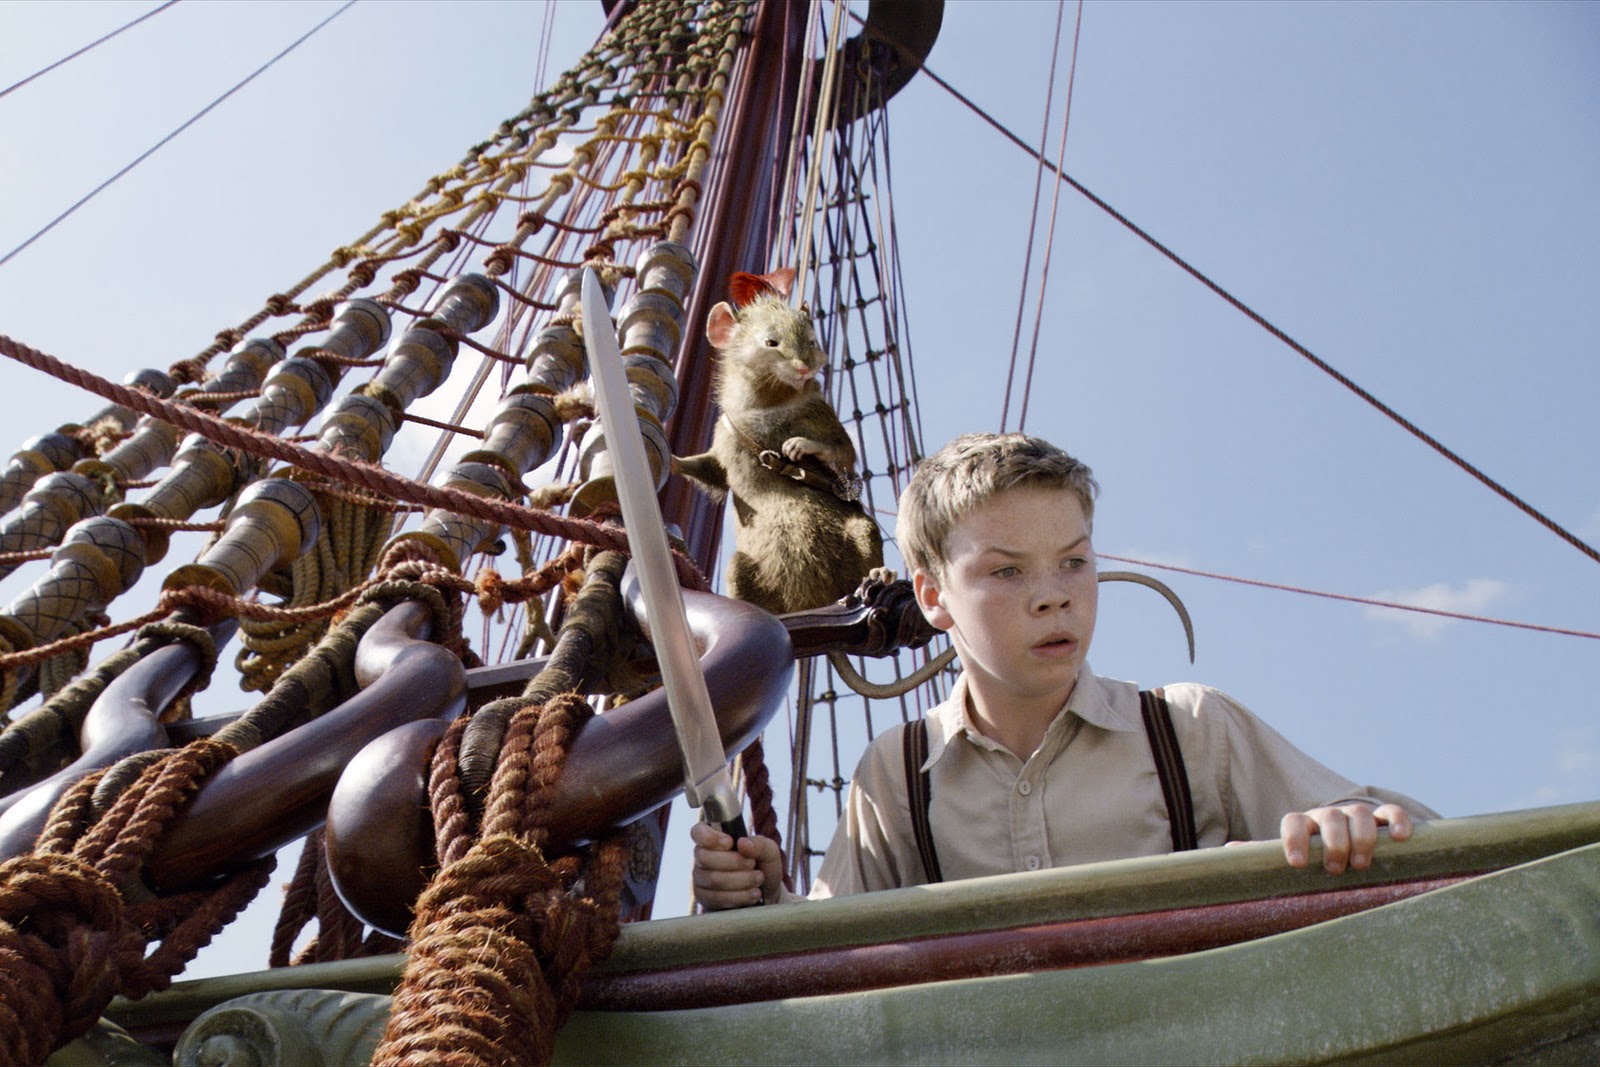 Will Poulter Joins the Voyage of the Dawn Treader.